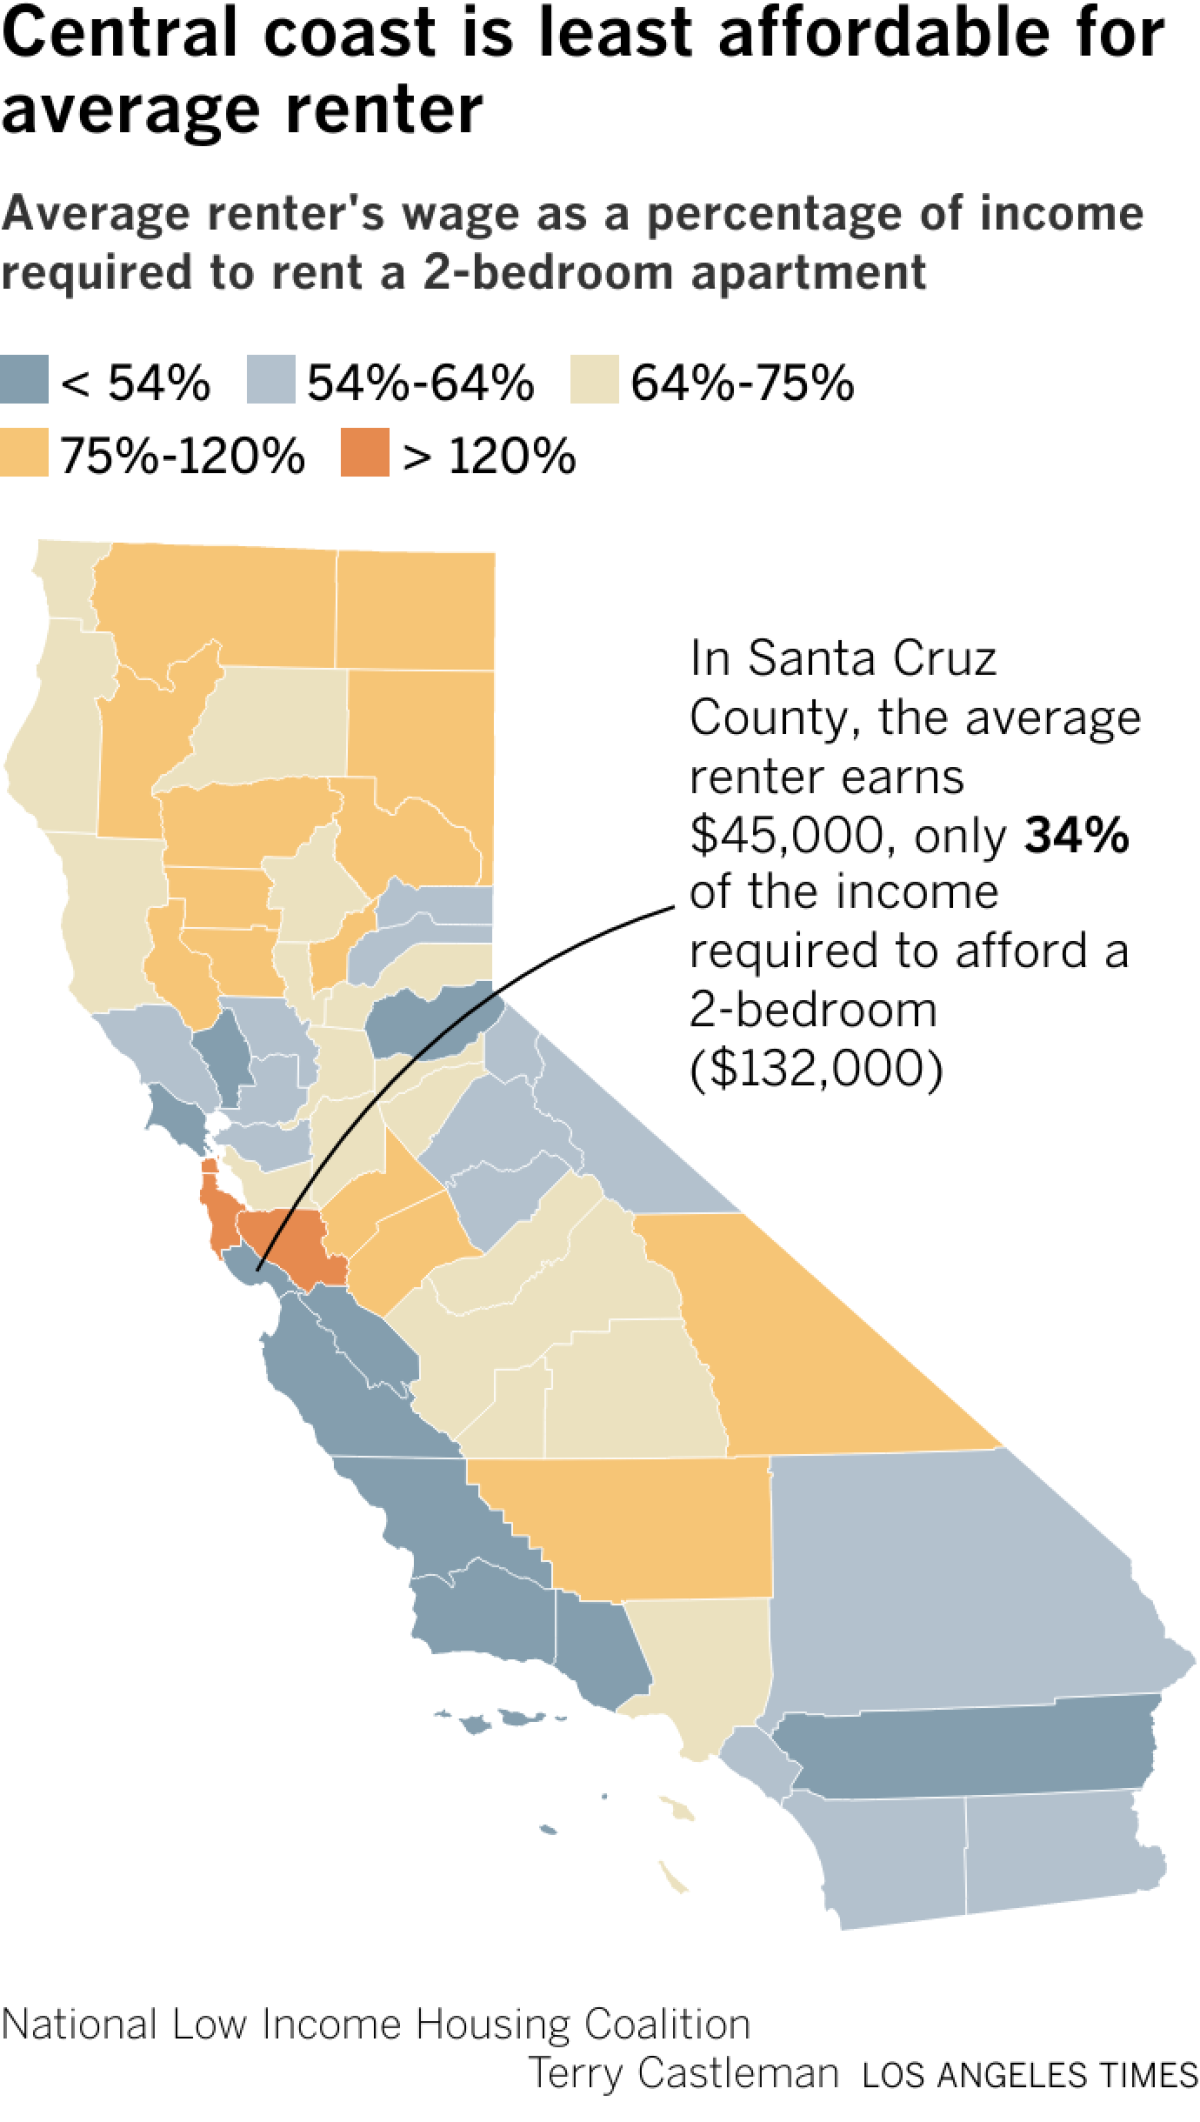 Shows that disparity between renter income and cost of renting an apartment is greatest in California's central coast